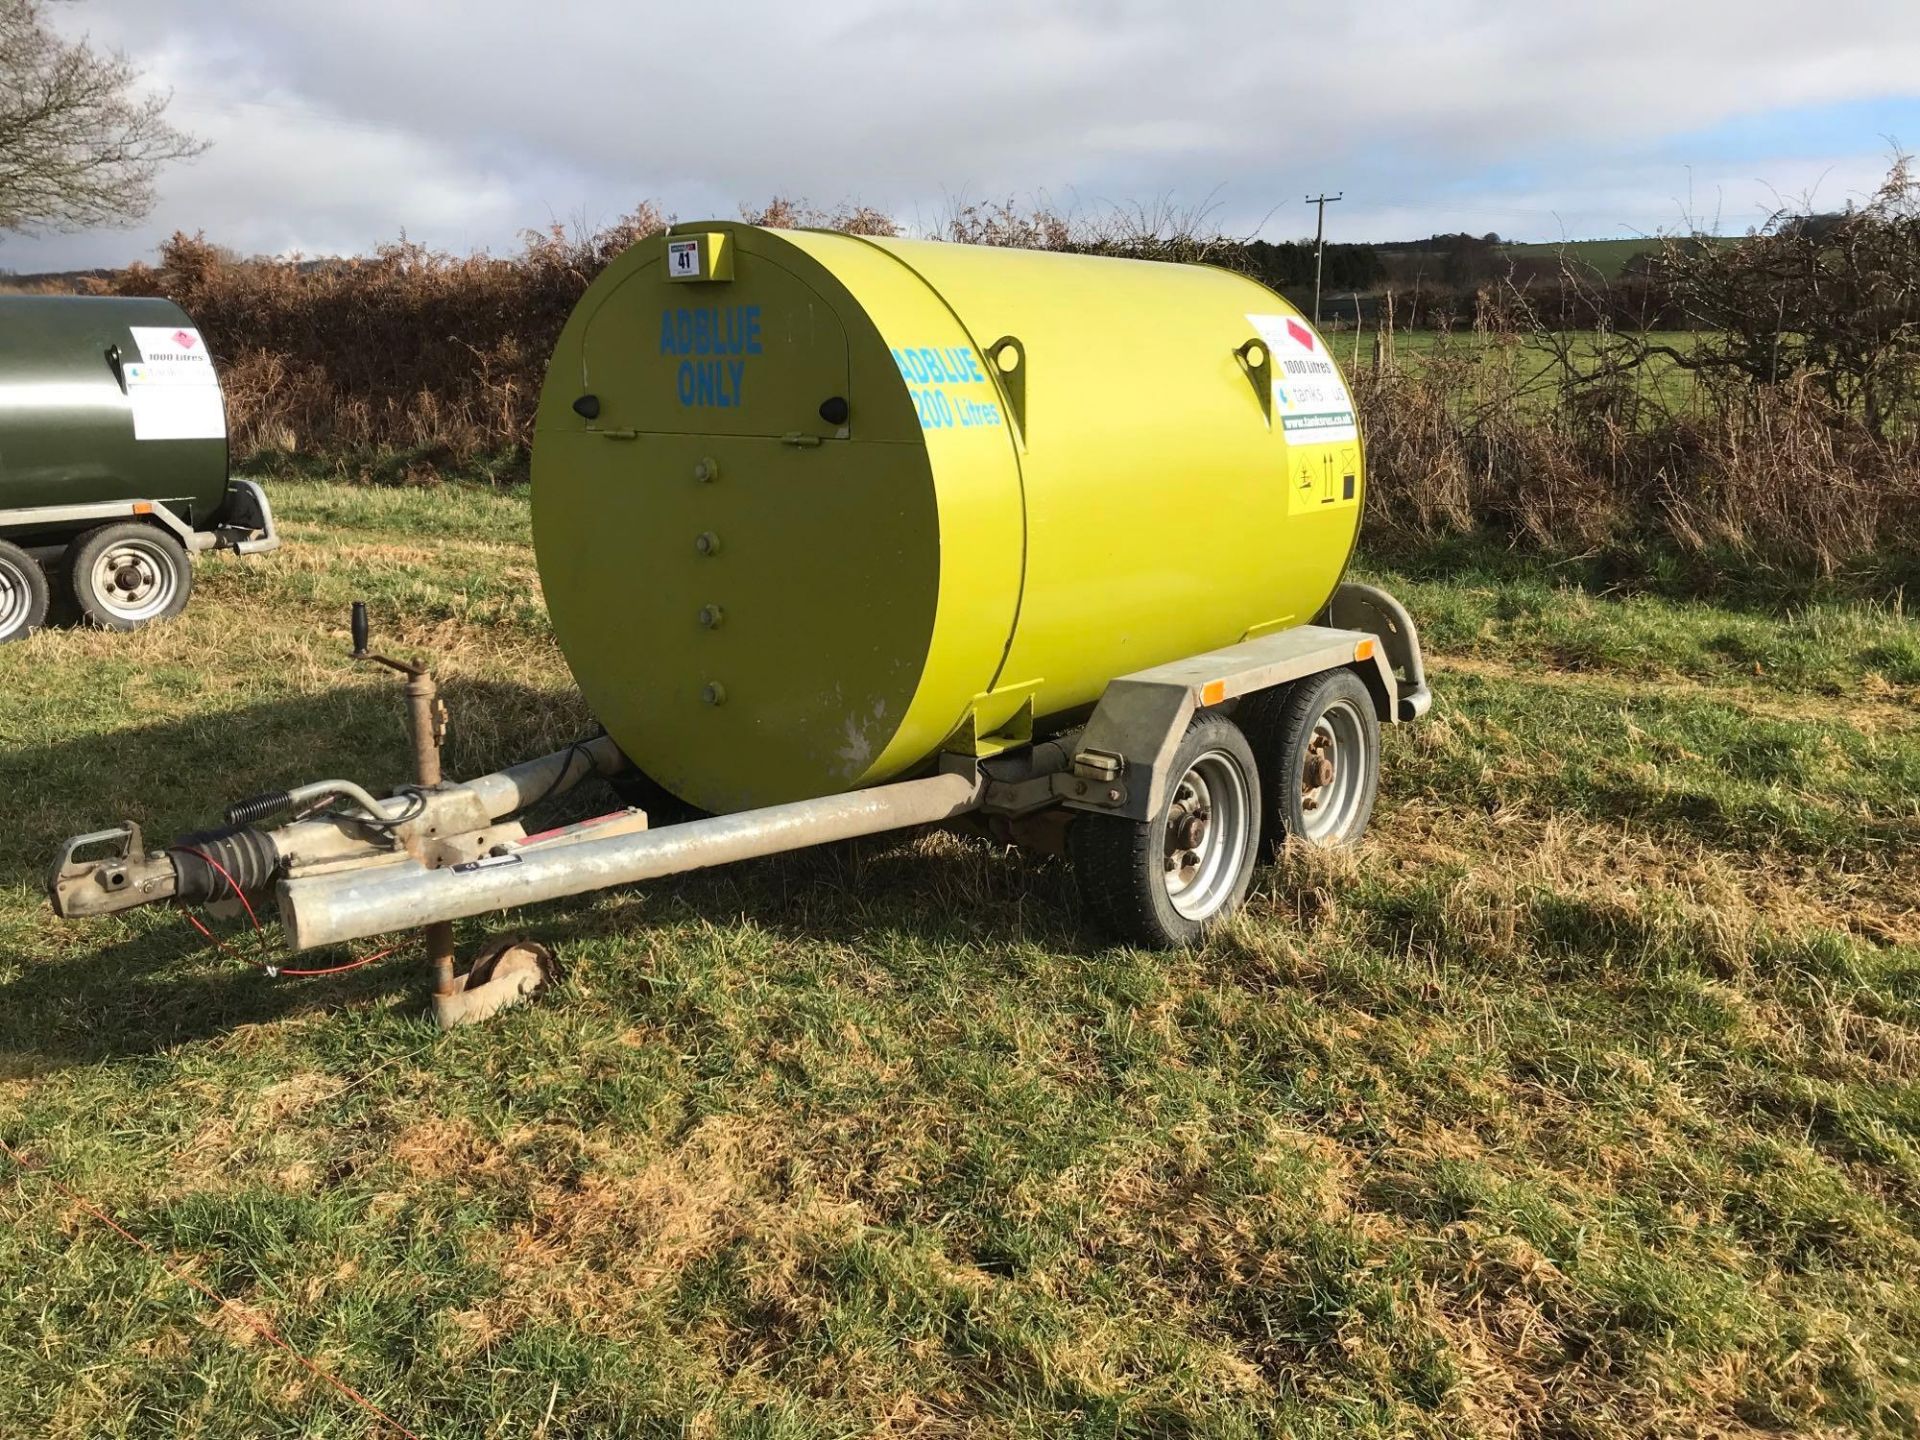 2013 FuelProof trailed bowser, 200L AdBlue and 1,000L gas oil capacity. Serial No: 14842/4